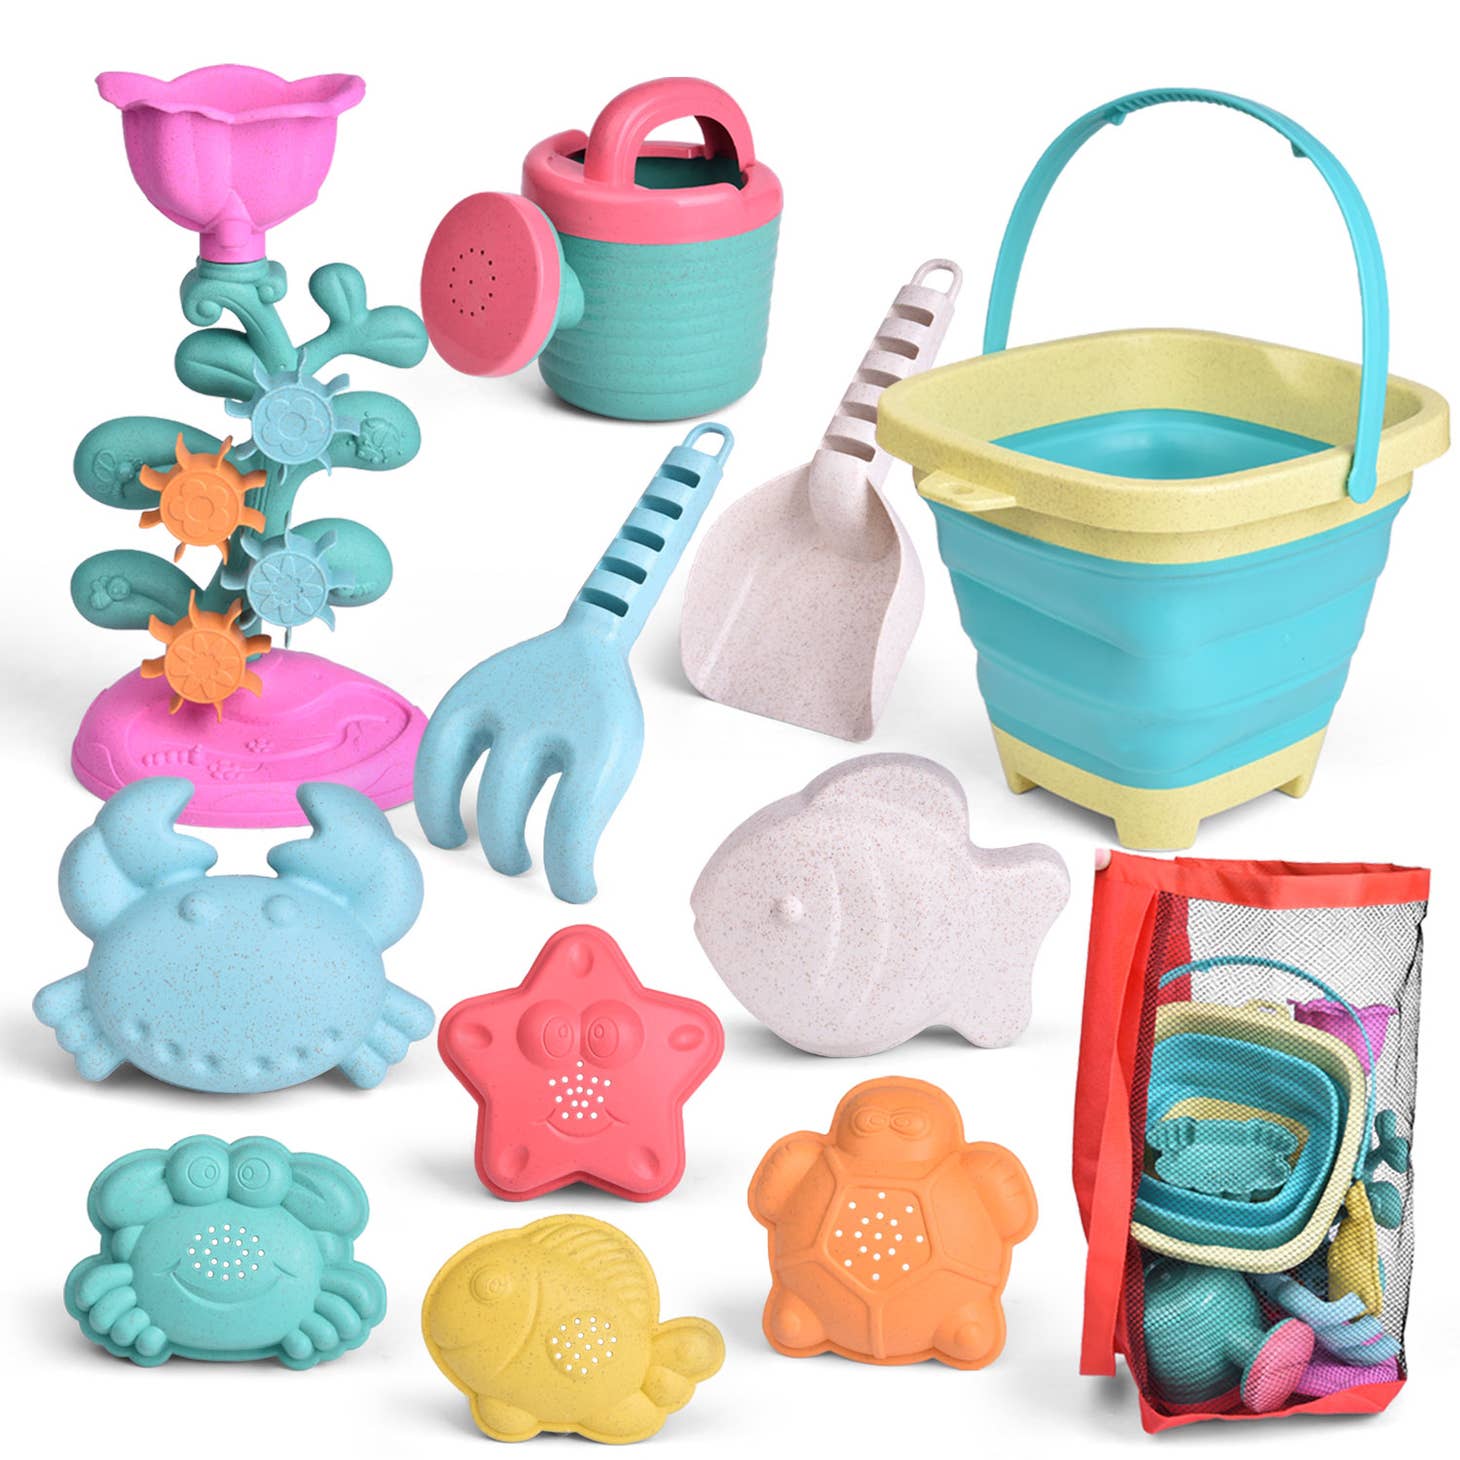 SILICONE BEACH TOYS Collapsible Beach Bucket Shovel Pink Sand